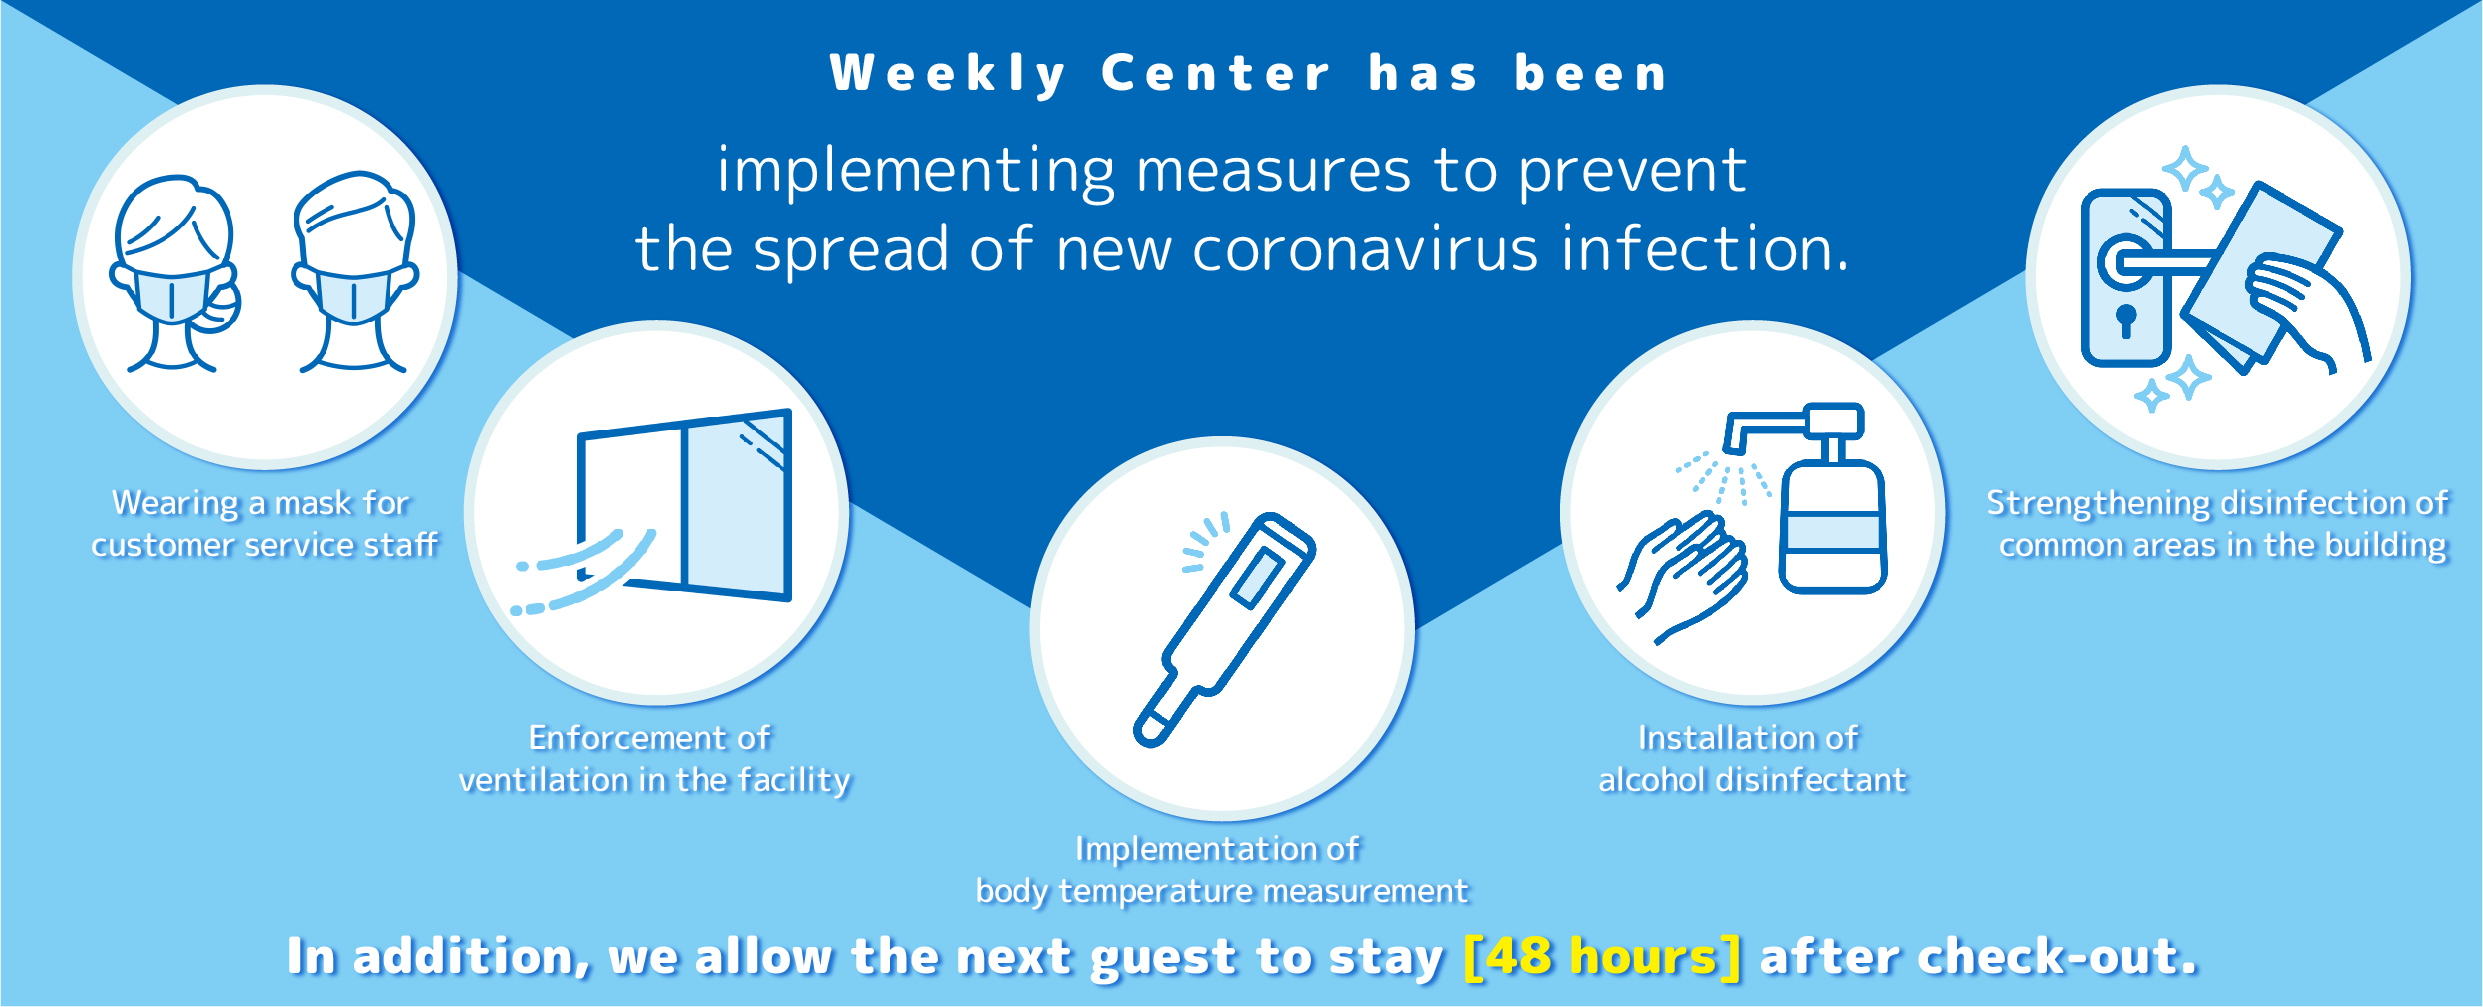 Weekly Center has been implementing measures to prevent the spread of new coronavirus infection